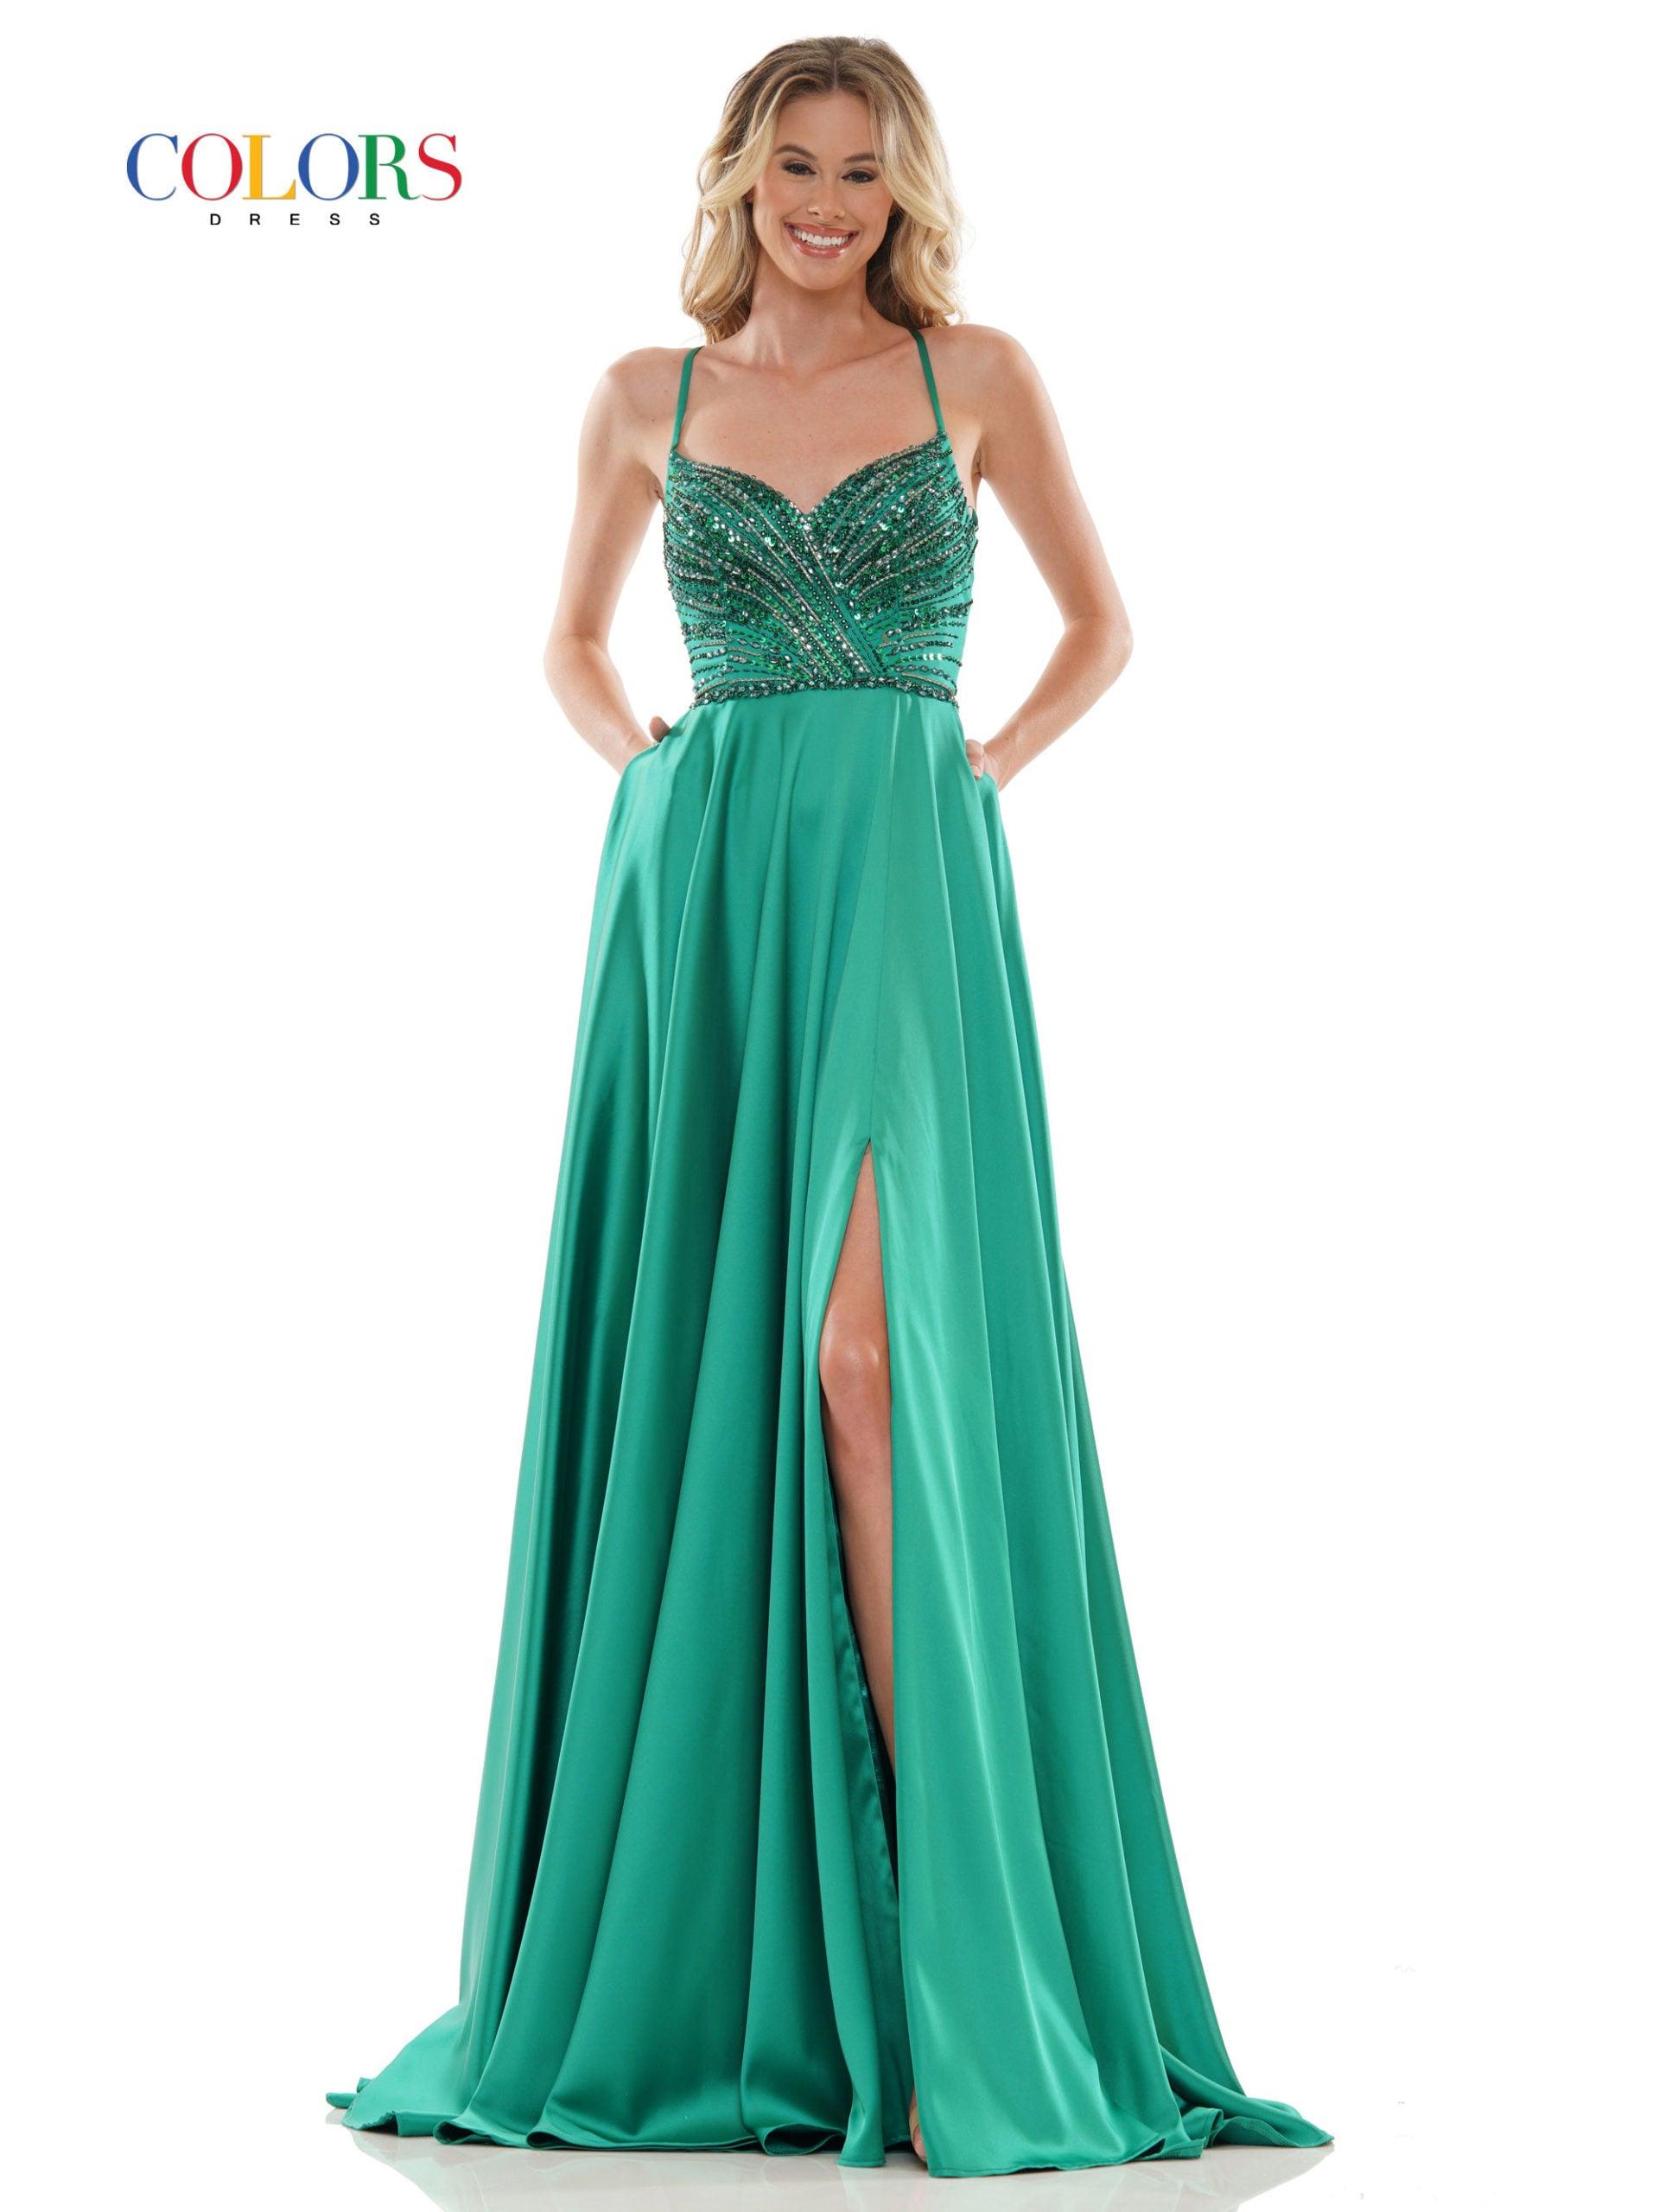 Colors Long Formal Beaded Prom Dress 2672 - The Dress Outlet